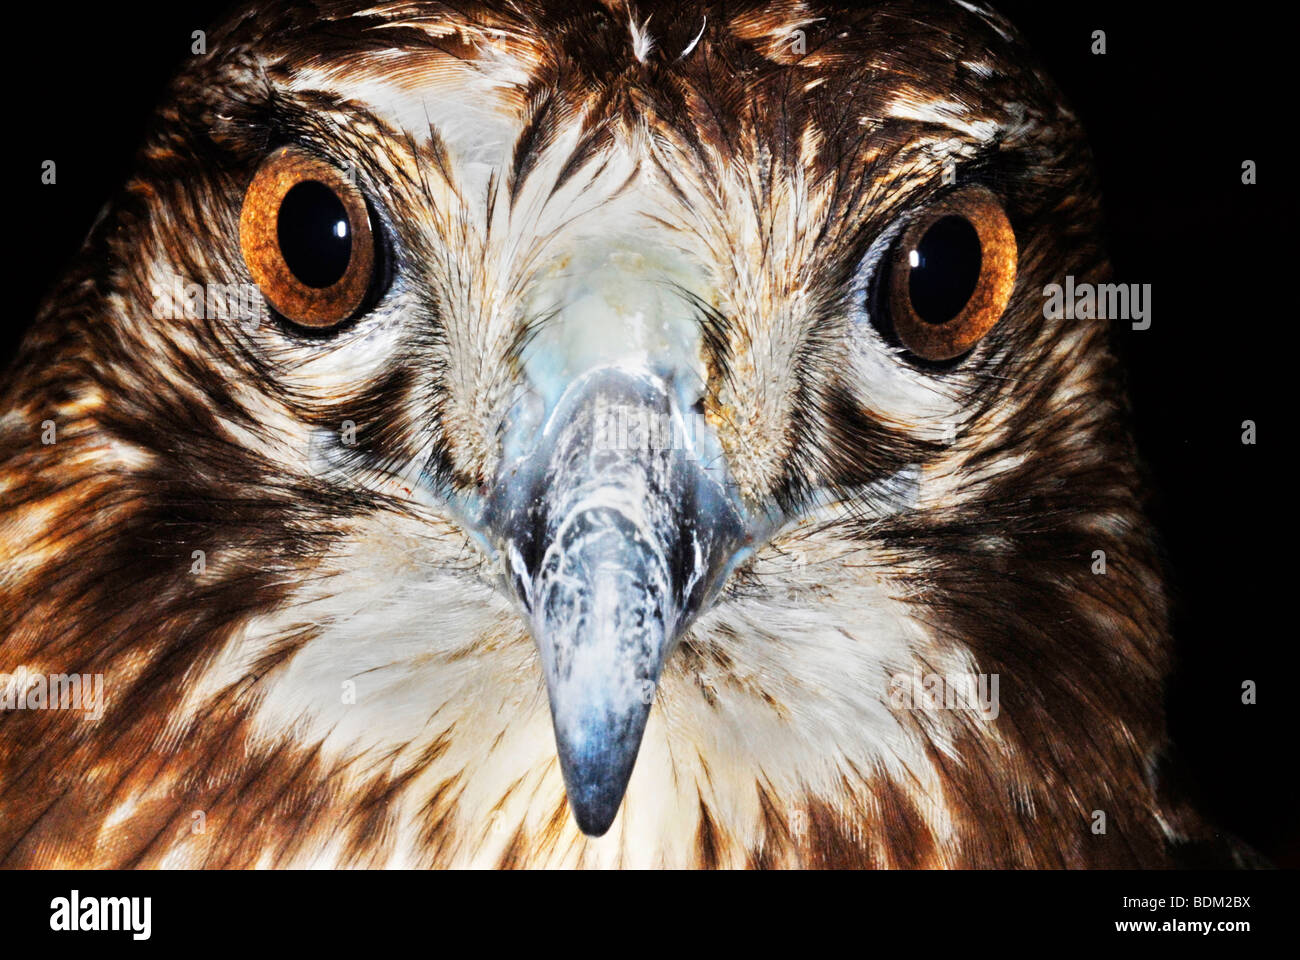 Red-tailed Hawk (Buteo jamaicensis), close-up view of its head Stock Photo